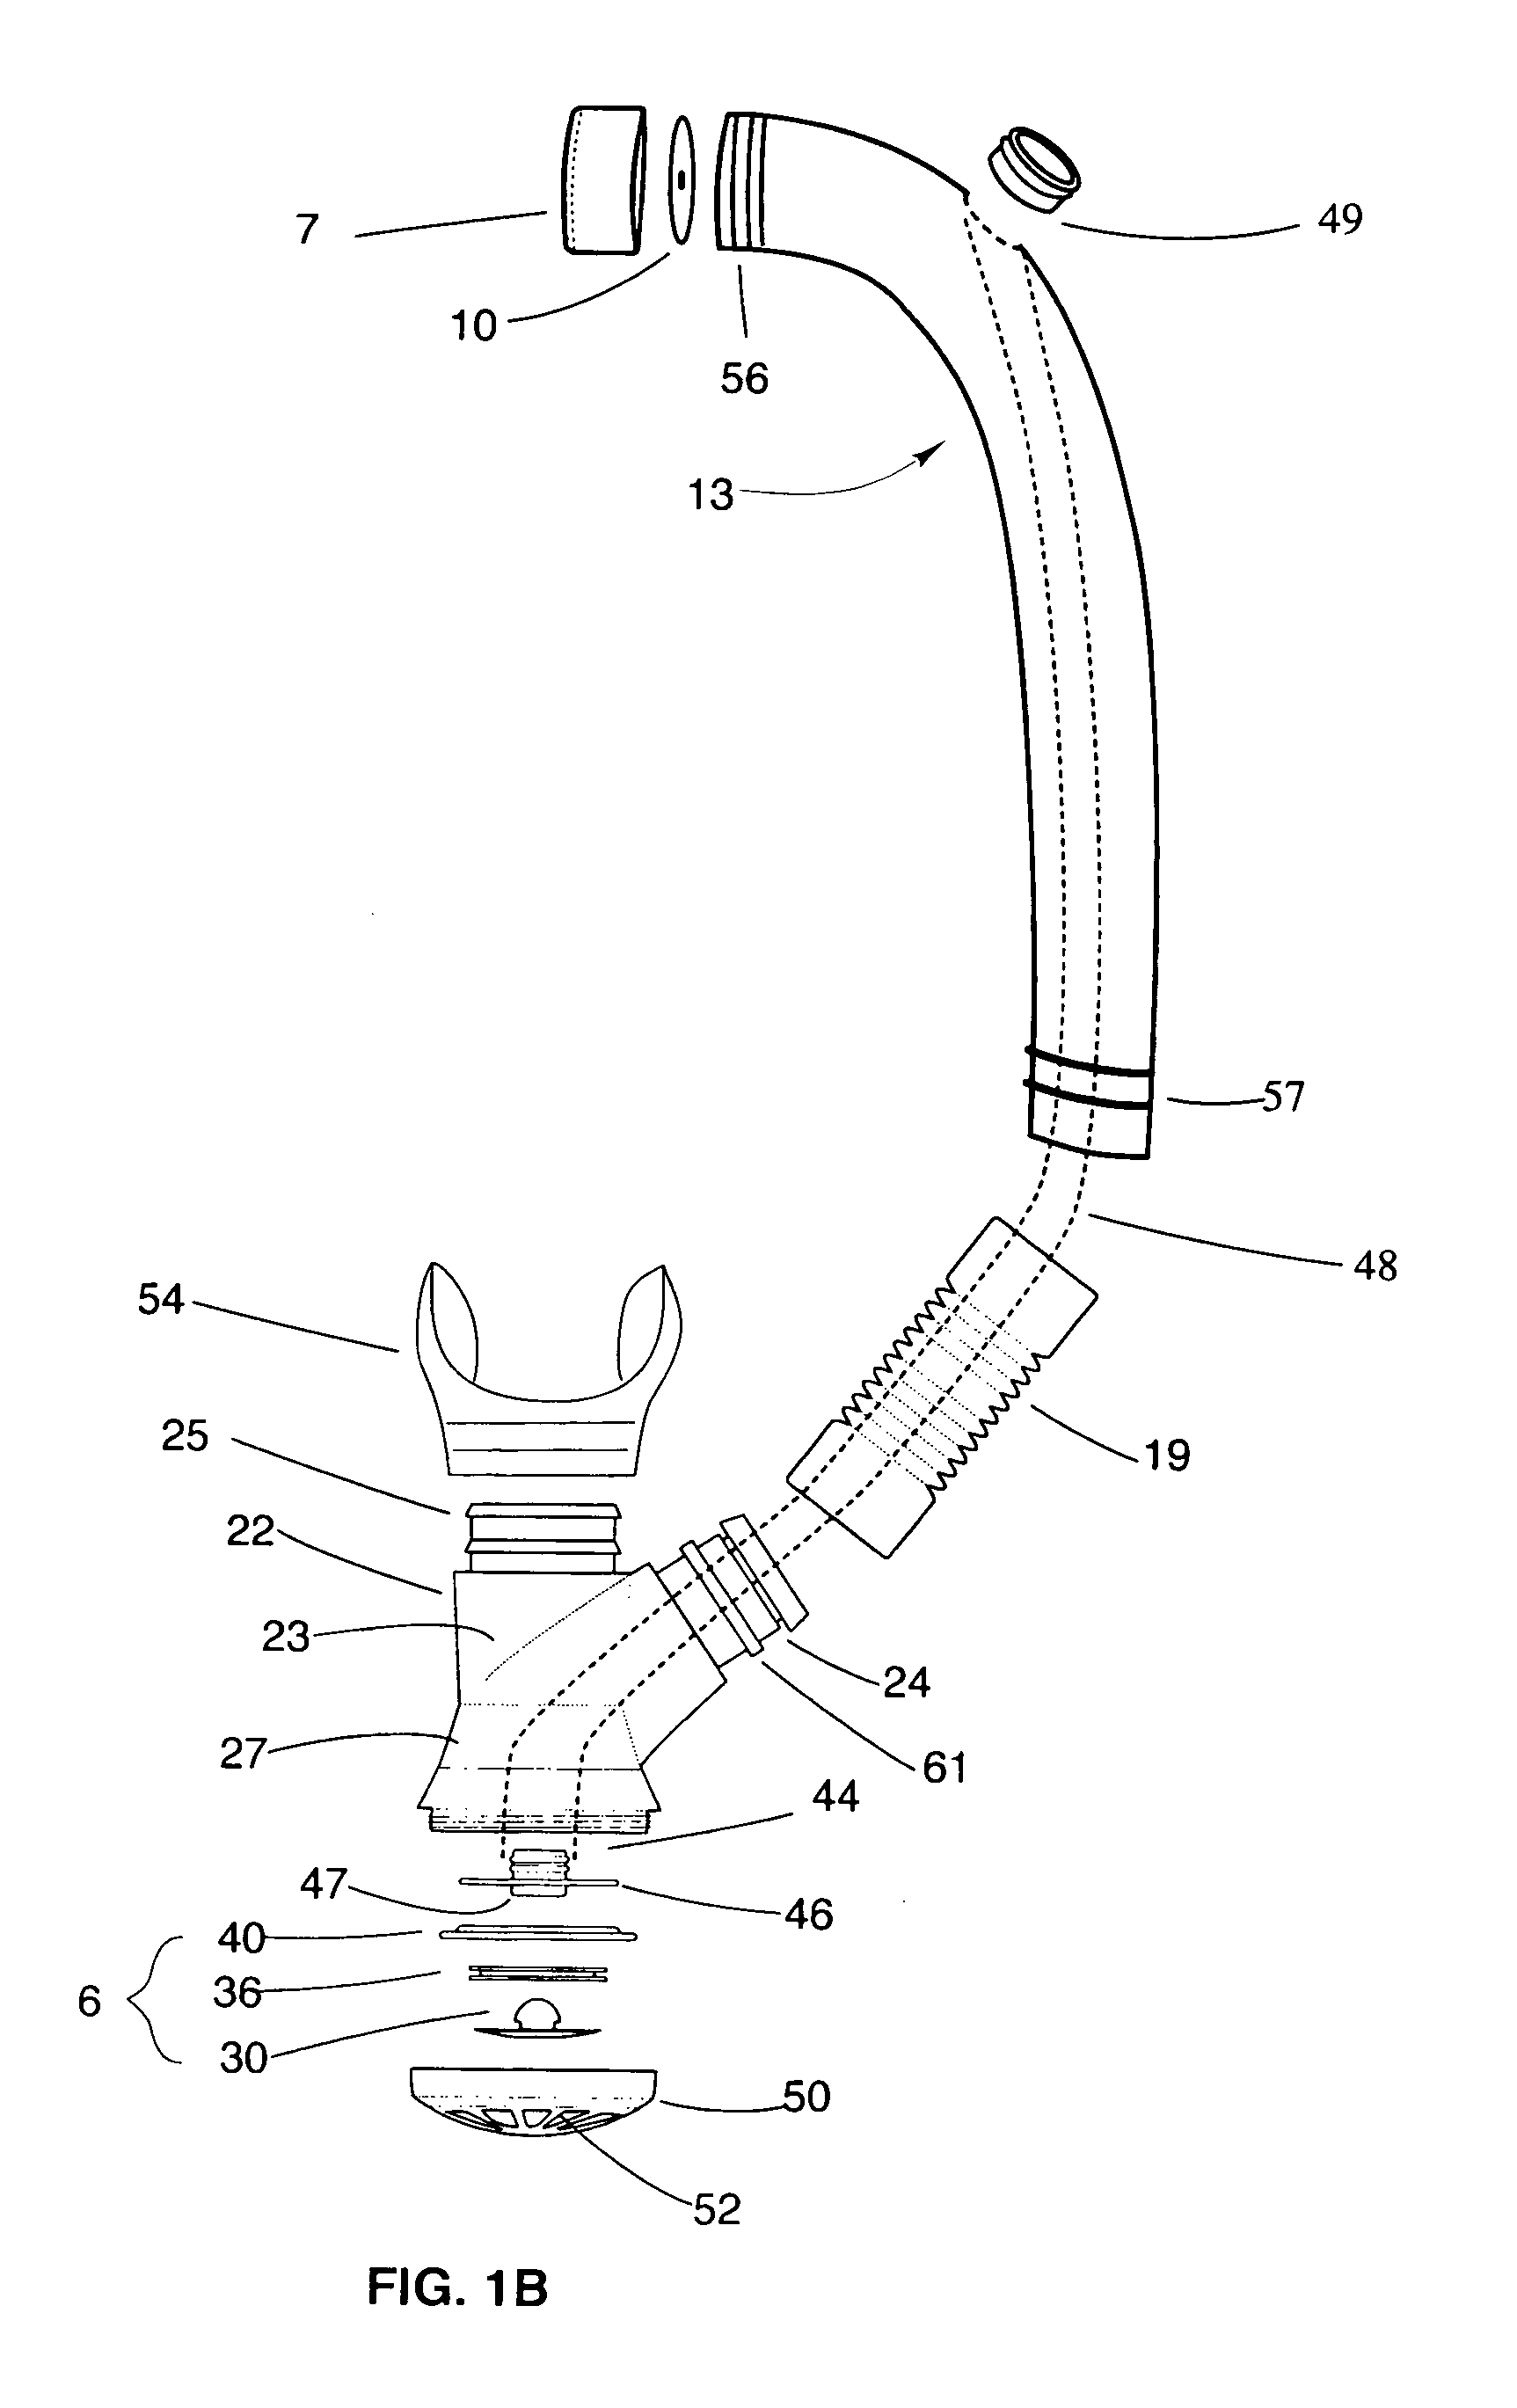 Underwater breathing devices and methods